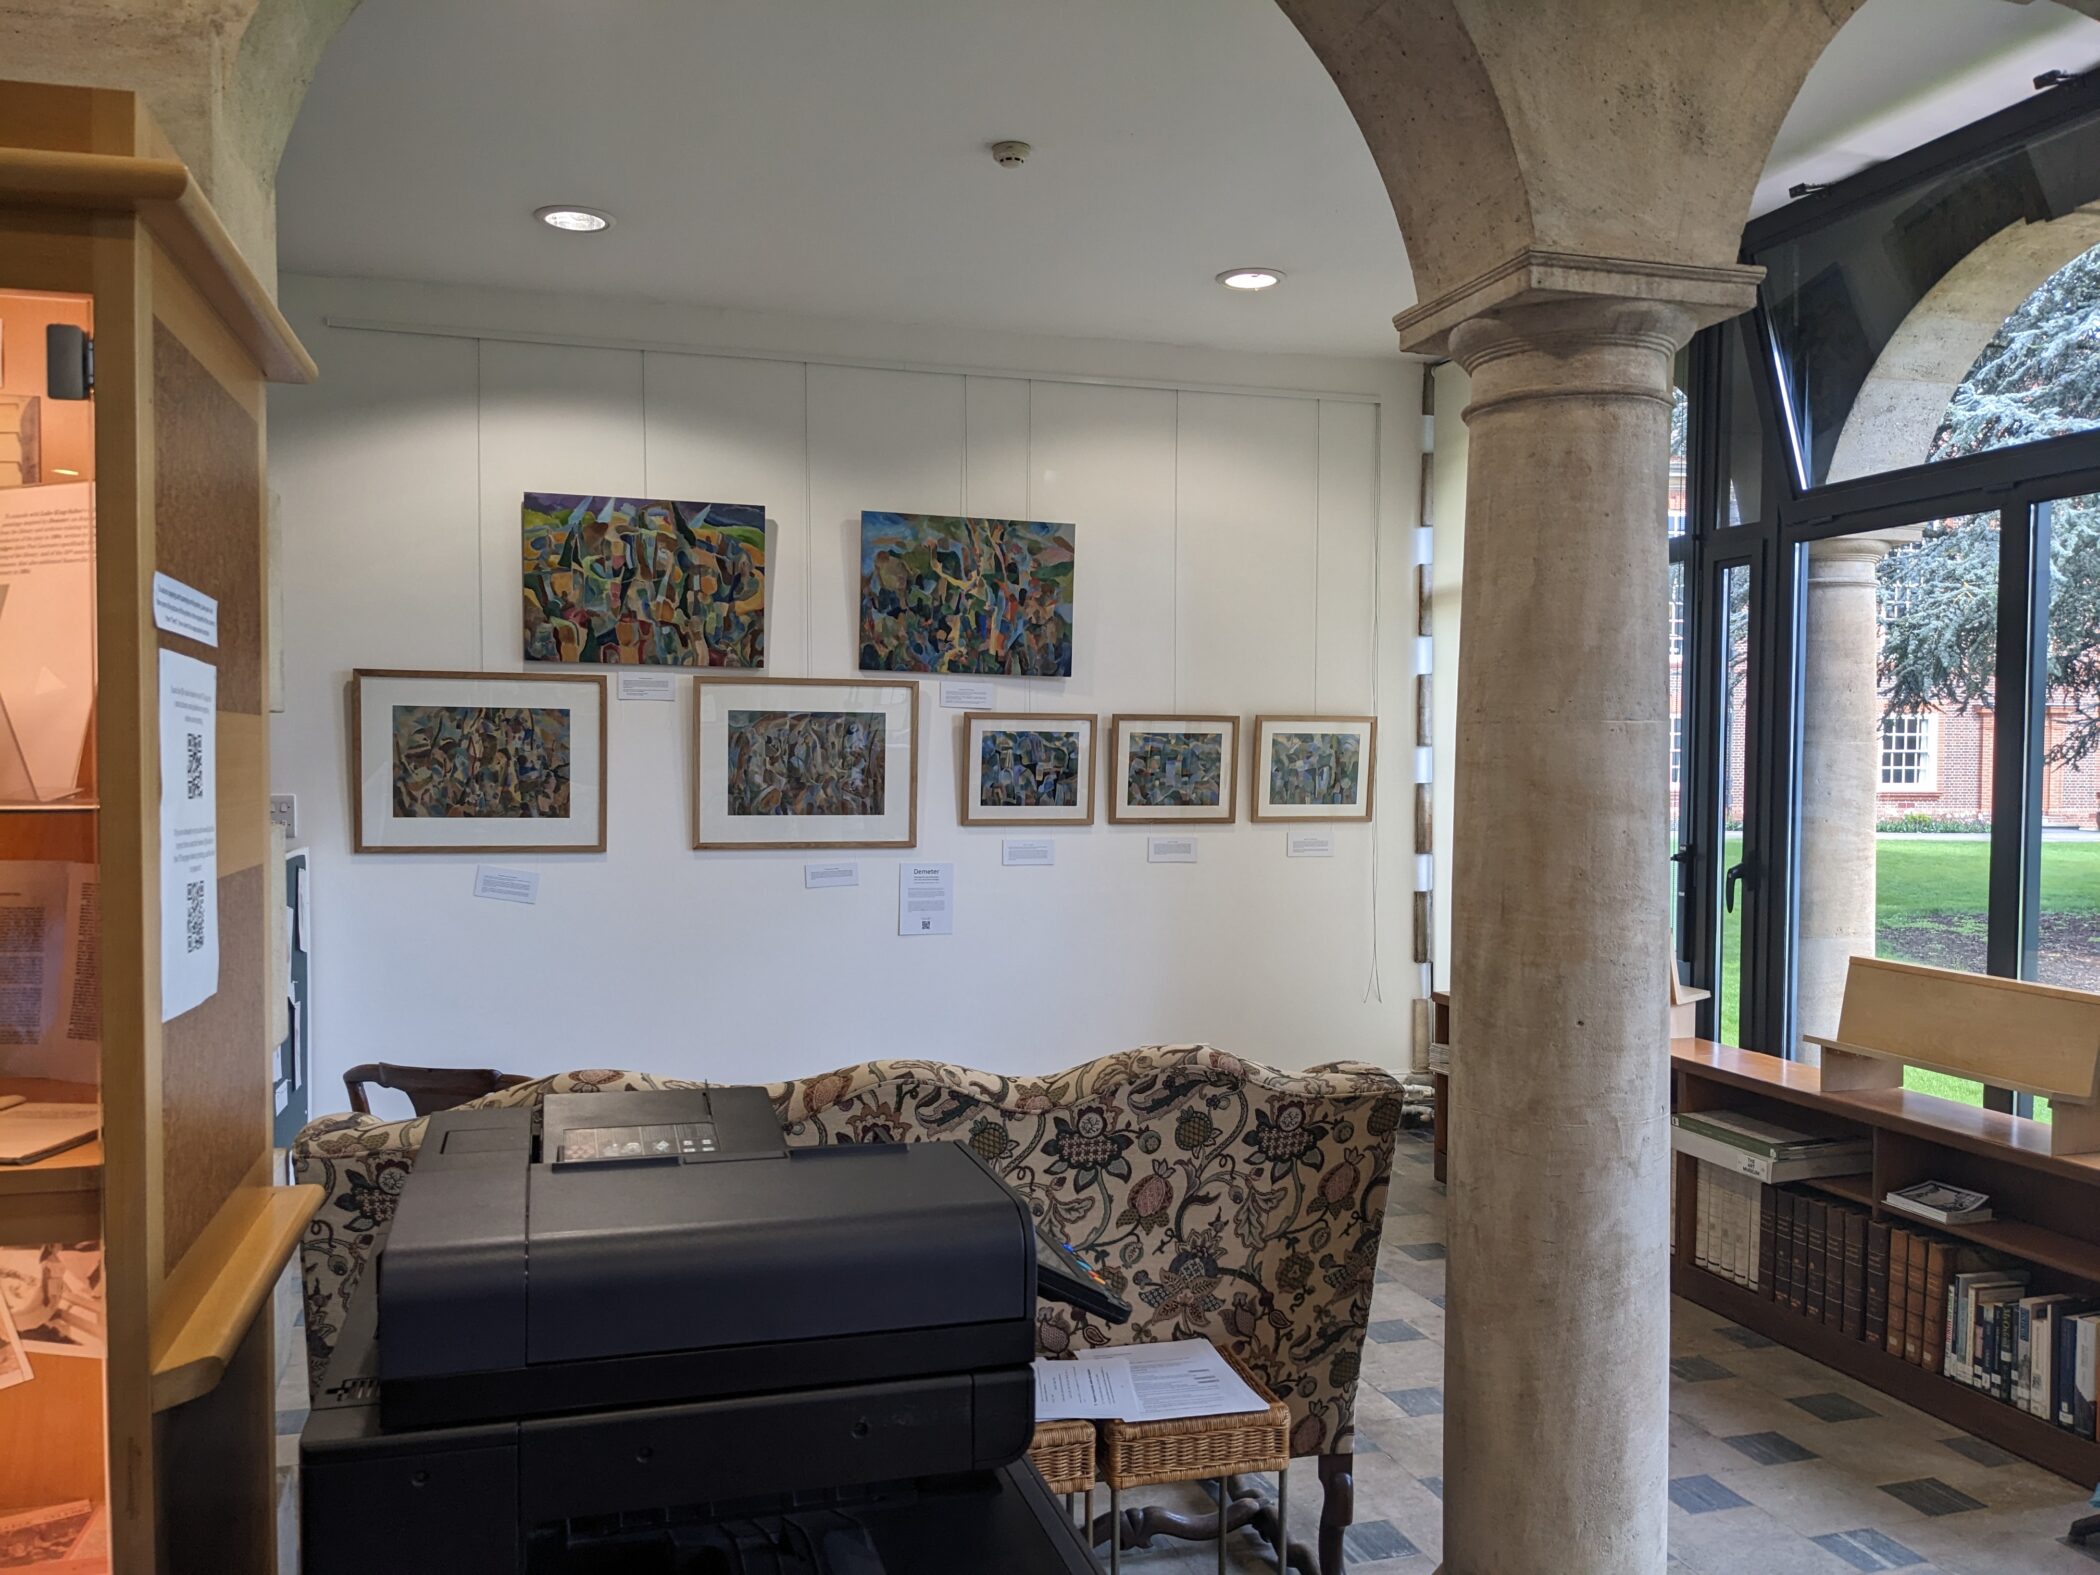 The Library Loggia has recently been renovated as a new exhibition space, with its first show featuring work by local artist Luke King-Salter inspired by Robert Bridges' play 'Demeter', comissioned for the Library's opening and first performed in 1904 by our students.